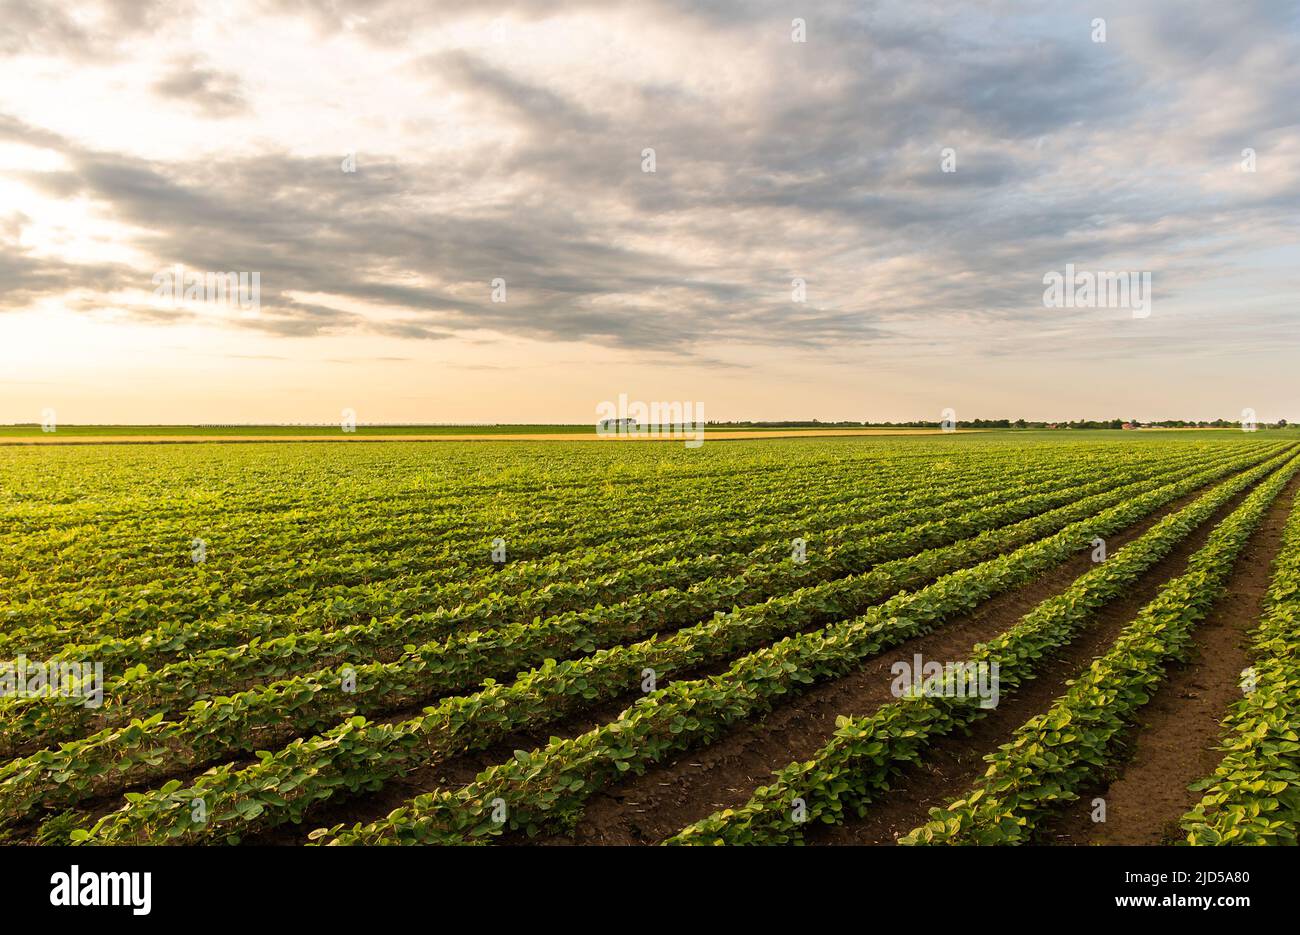 Cultivated land in a rural landscape at sunset Stock Photo